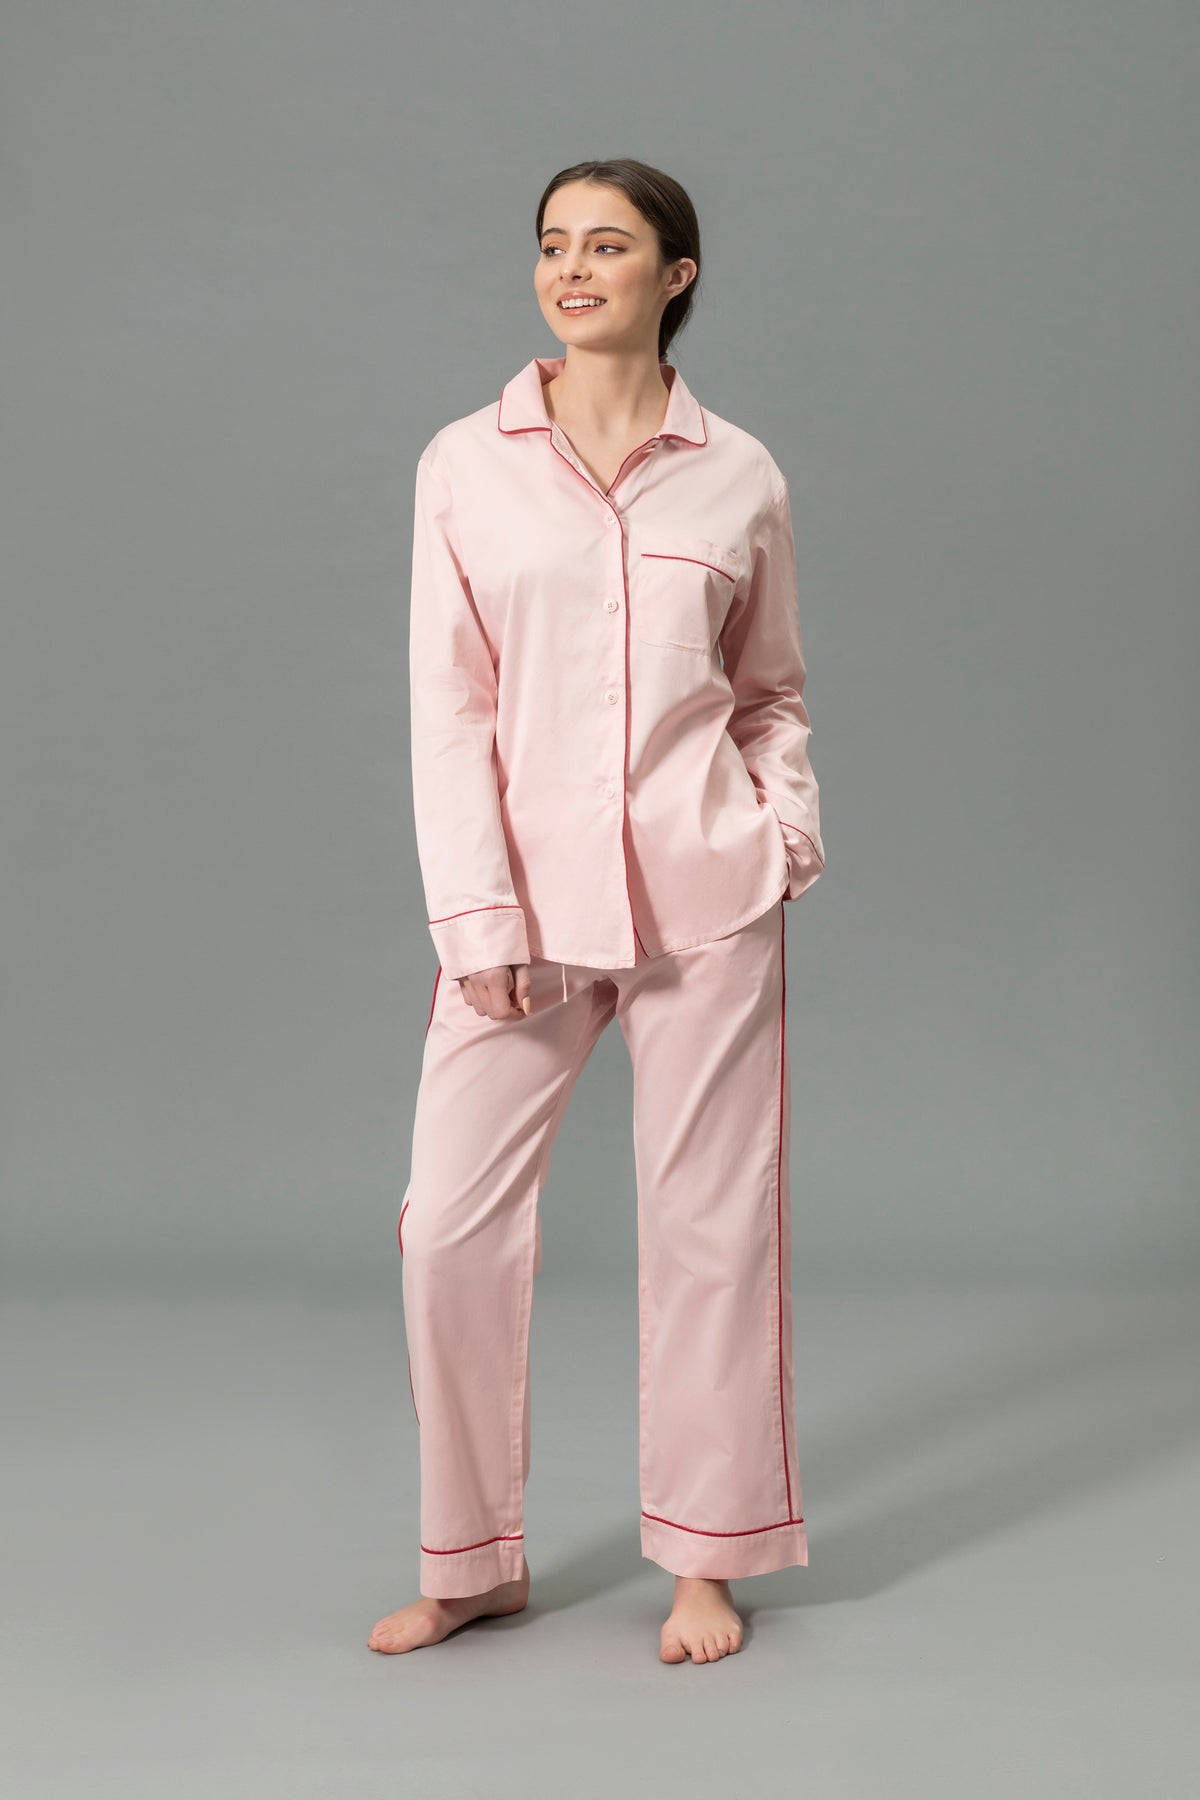 Front View of Model Wearing Matouk Nocturne Pajama Set in Color Pink and Scarlet